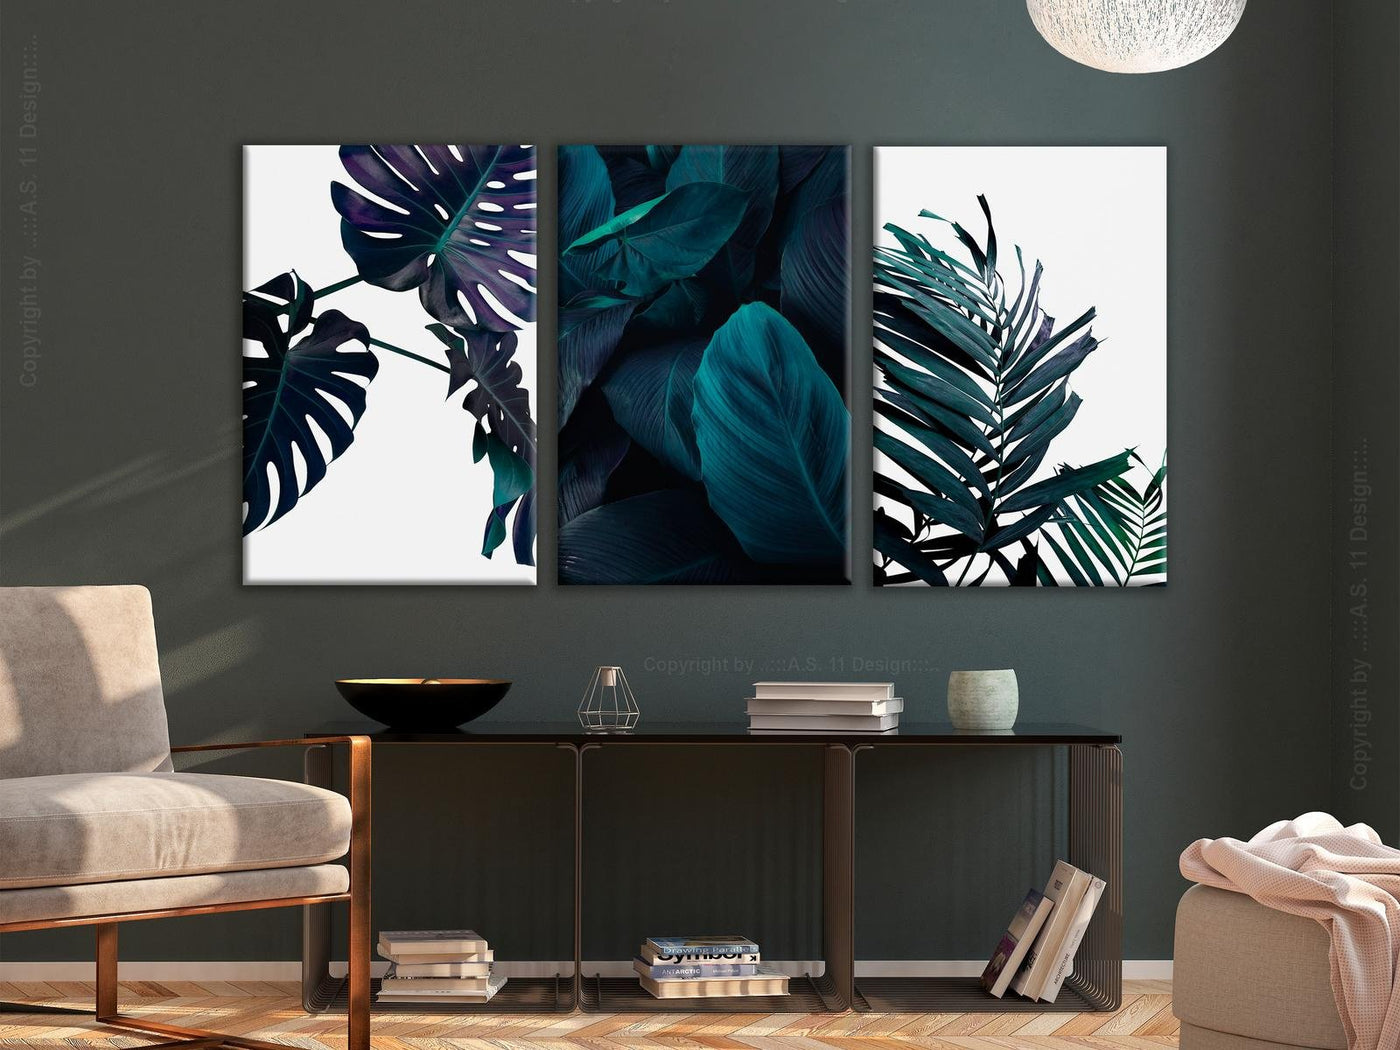 Stretched Canvas Nordic Art - Cold Leaves-Tiptophomedecor